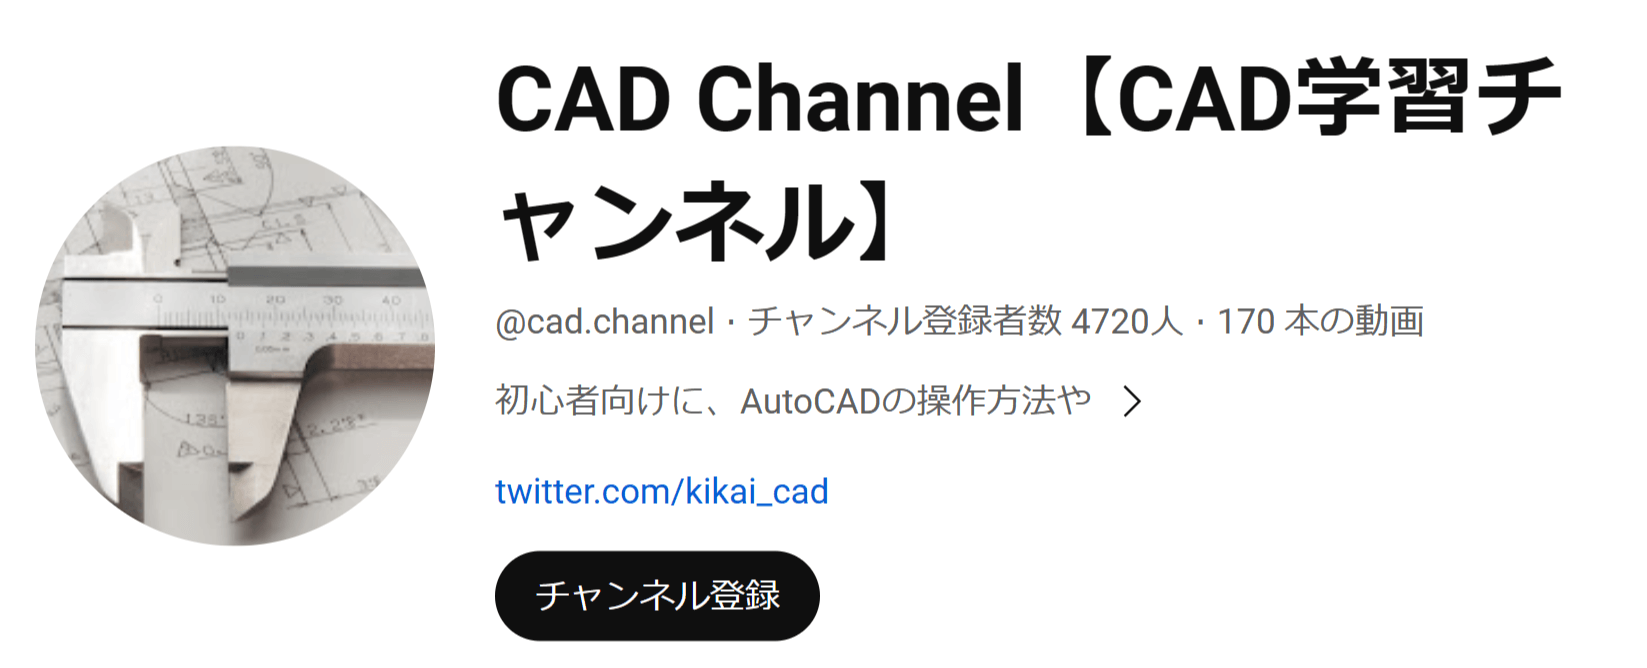 CAD Channel　